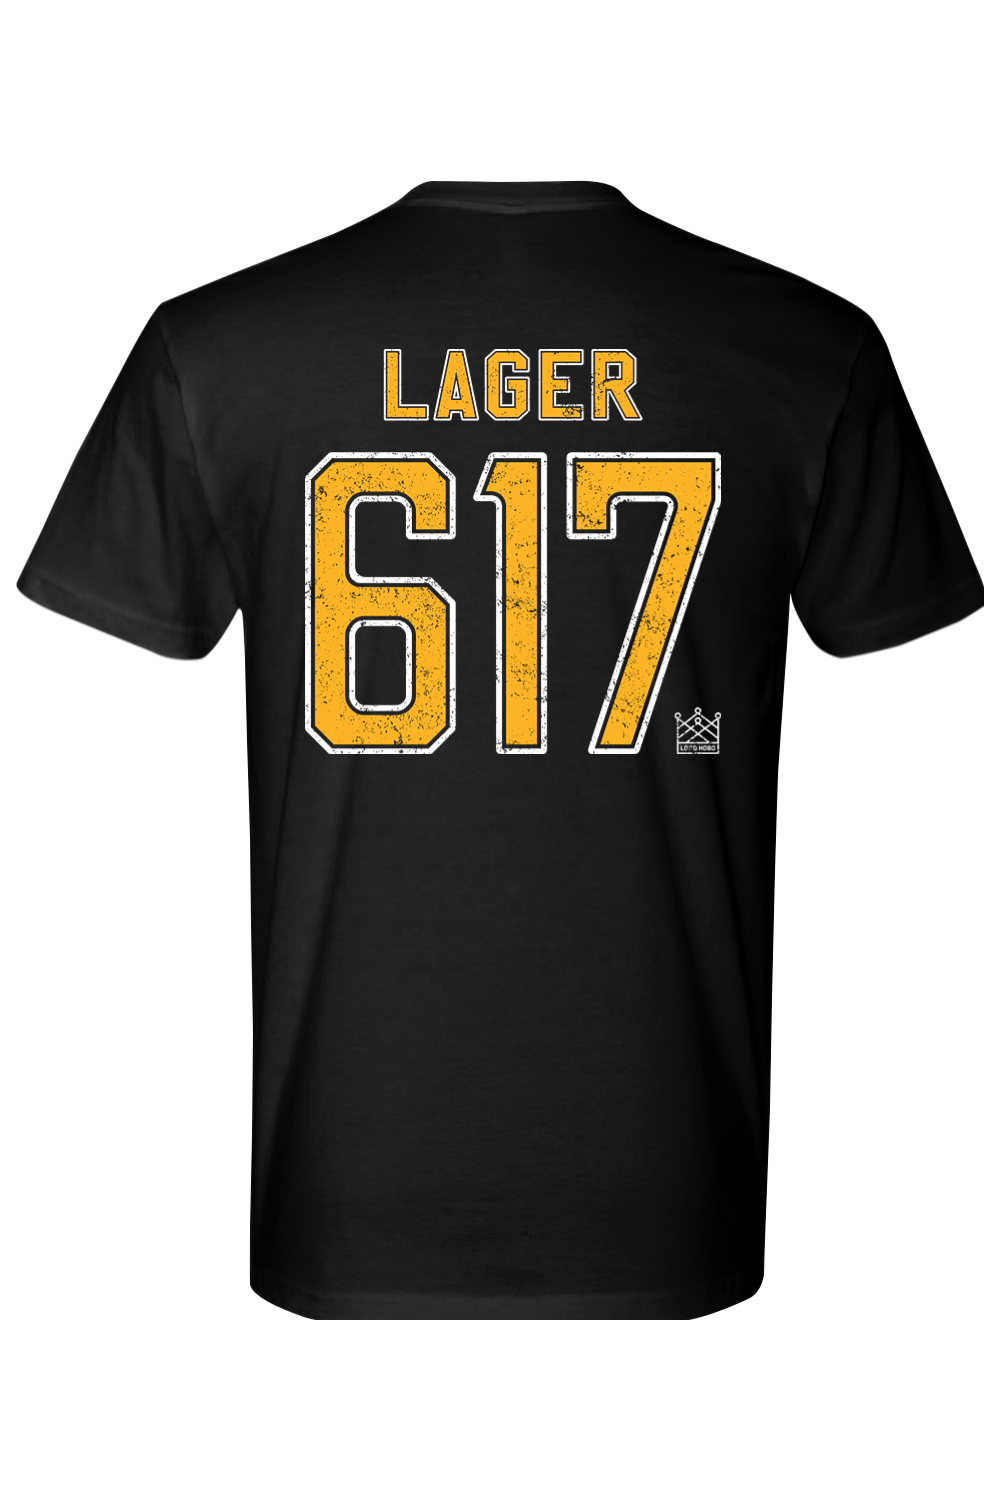 Lord Hobo 617 Lager Short Sleeve Crew